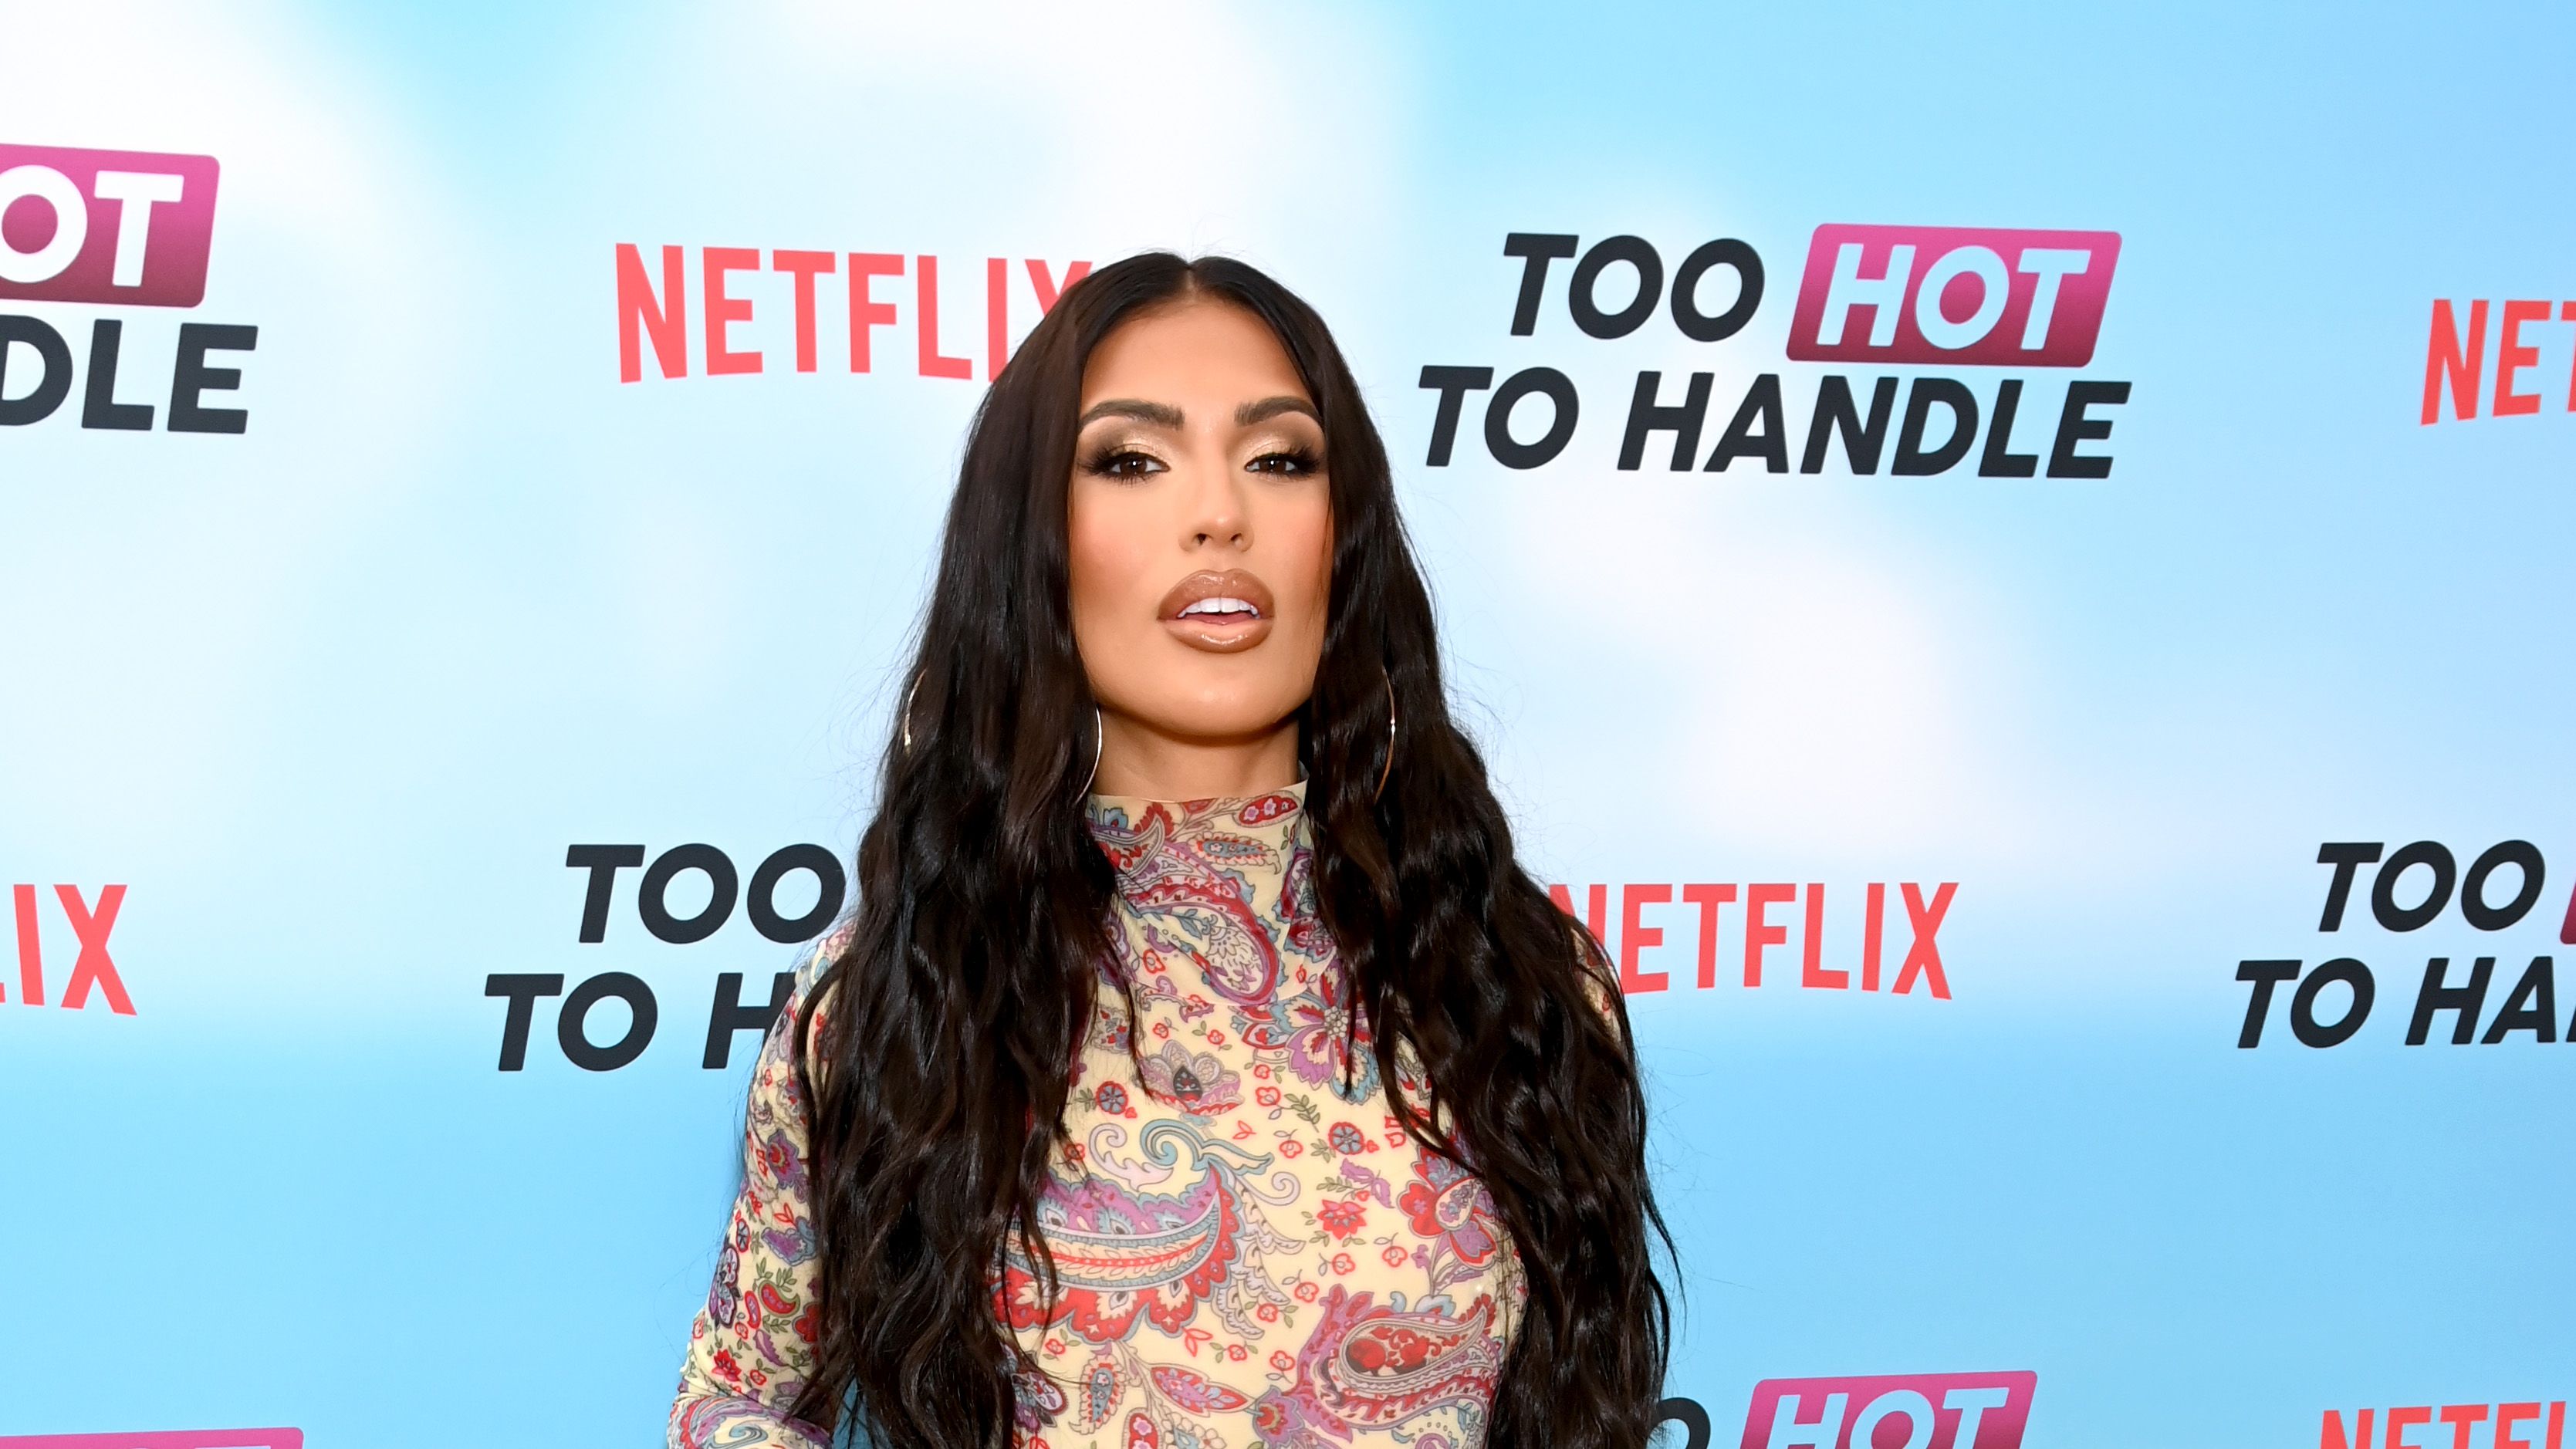 Netflix's Too Hot To Handle star Chloe Veitch dishes on what it was really  like to go on the show